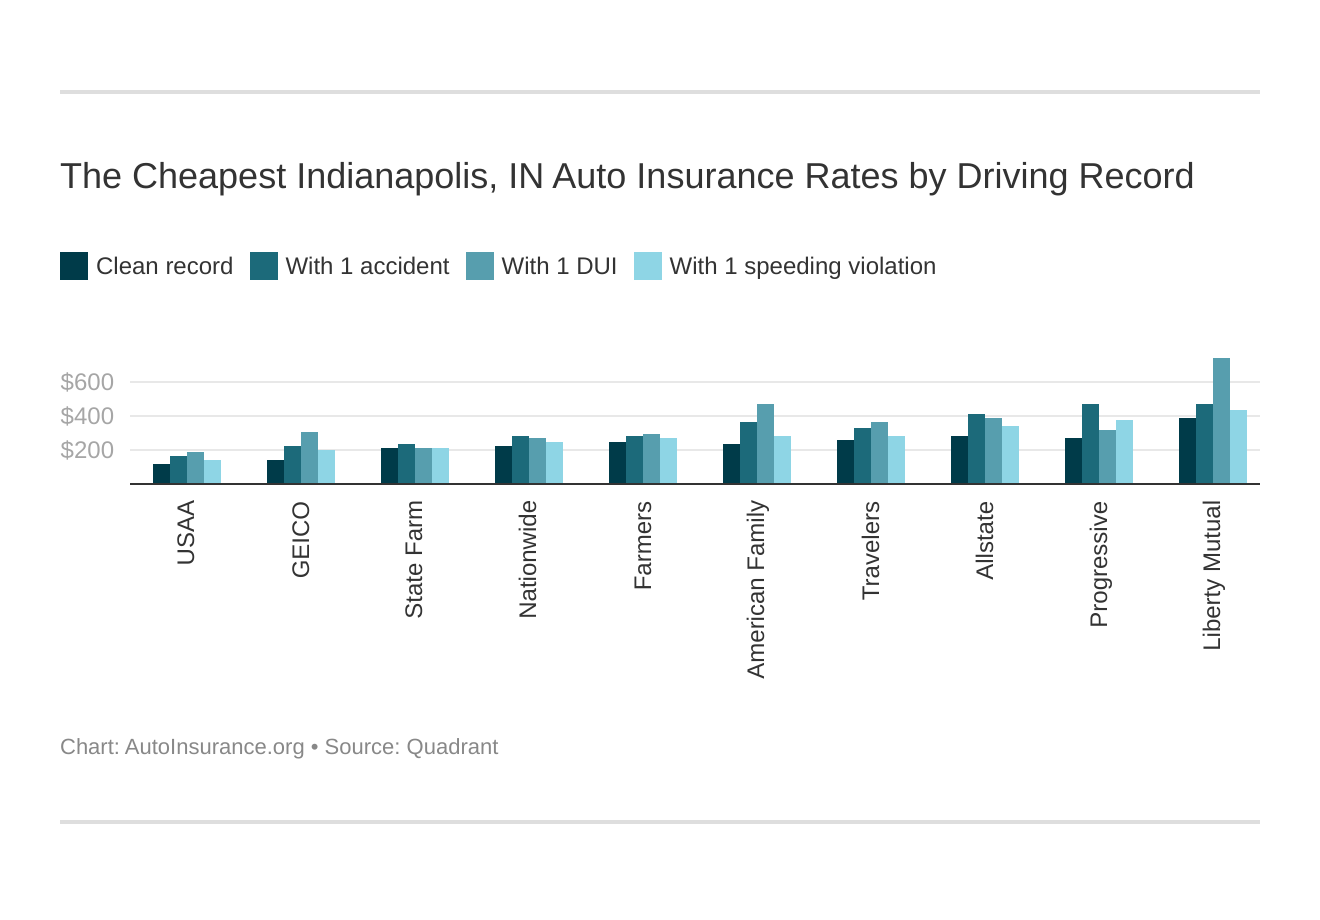 The Cheapest Indianapolis, IN Auto Insurance Rates by Driving Record